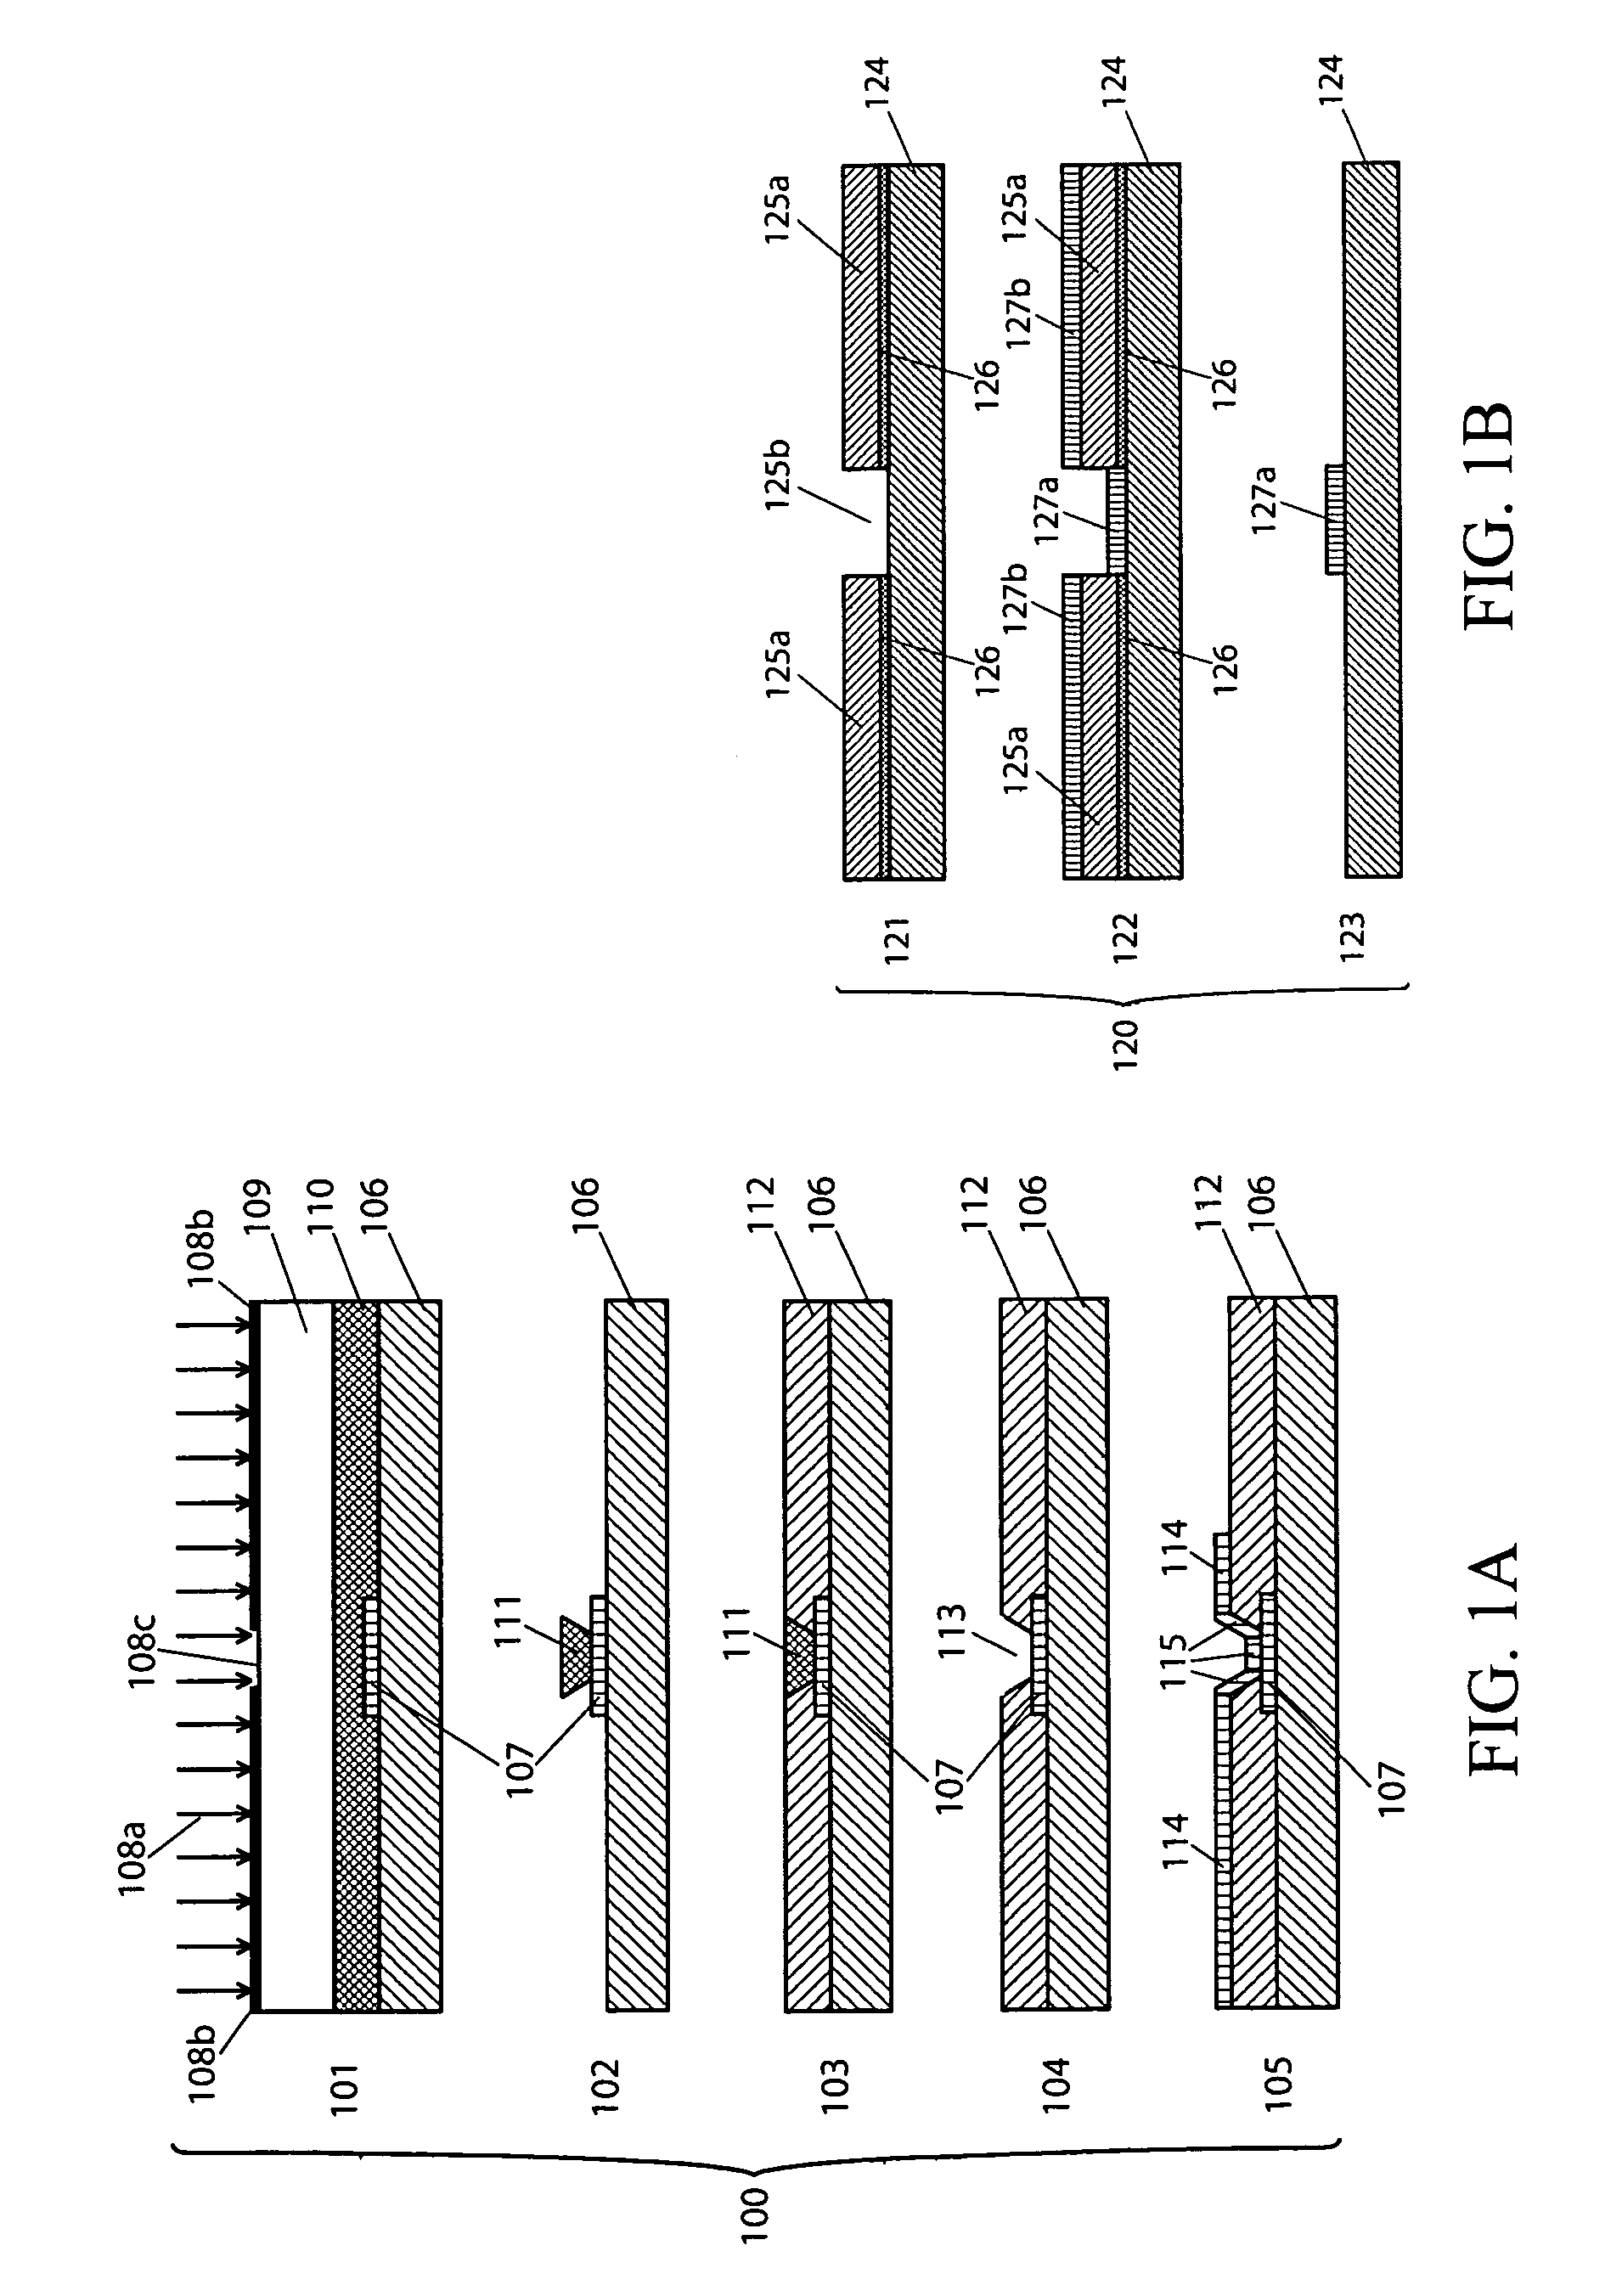 Integrated method for high-density interconnection of electronic components through stretchable interconnects